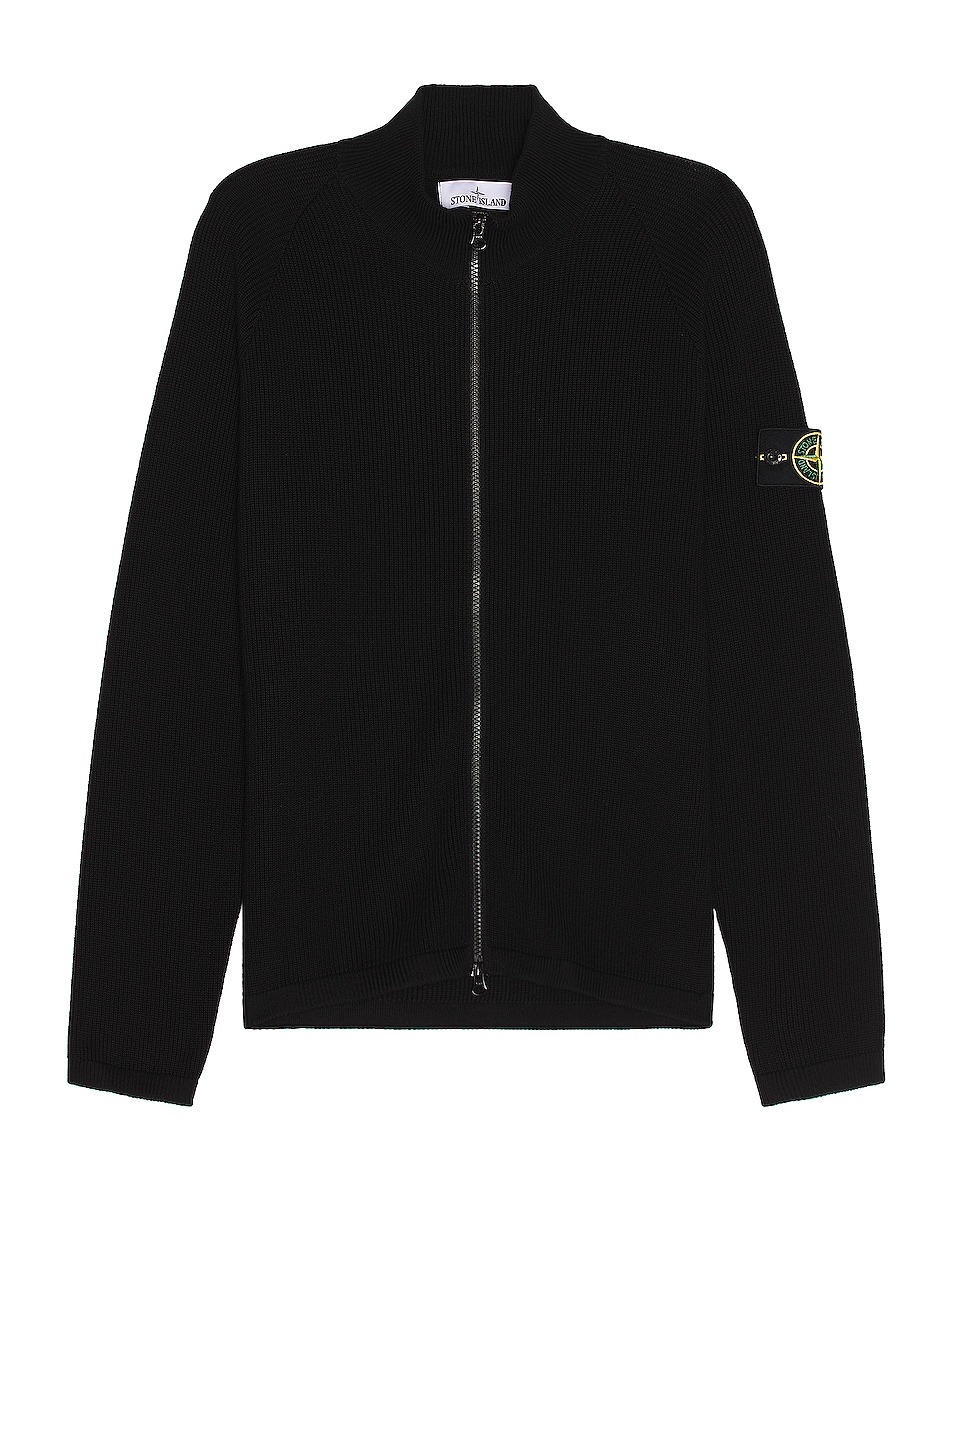 Image 1 of Stone Island Zip Up Sweater in Black